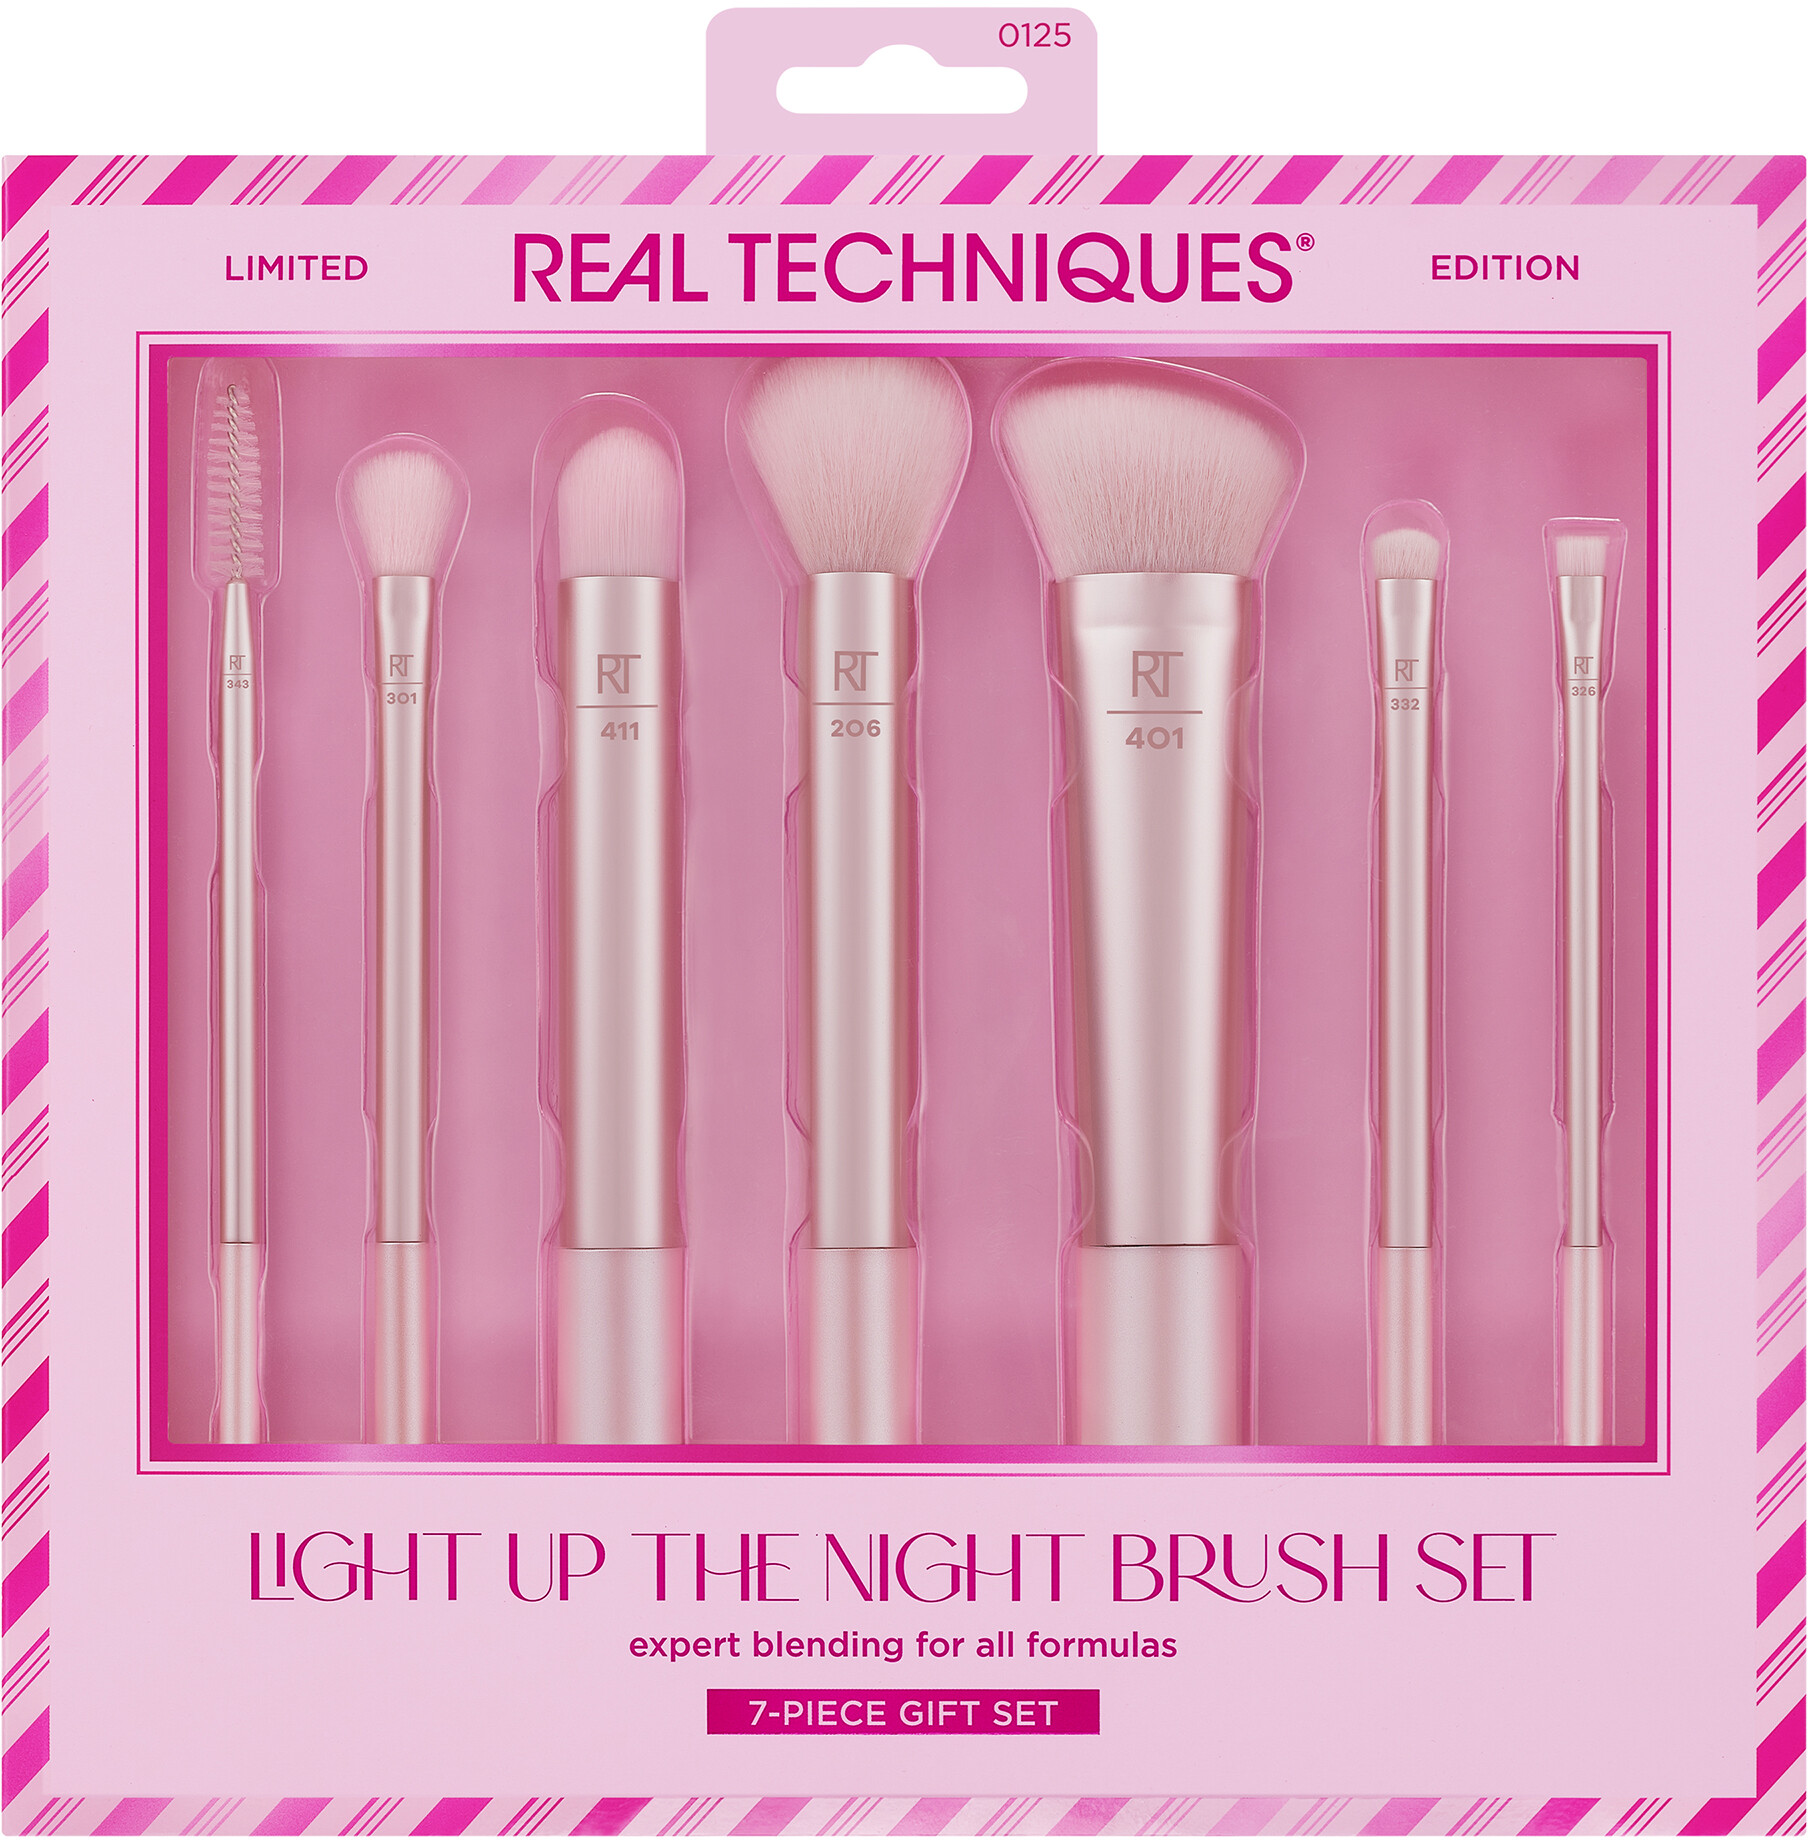 Real Techniques Light Up The Night 7-Piece Gift Set